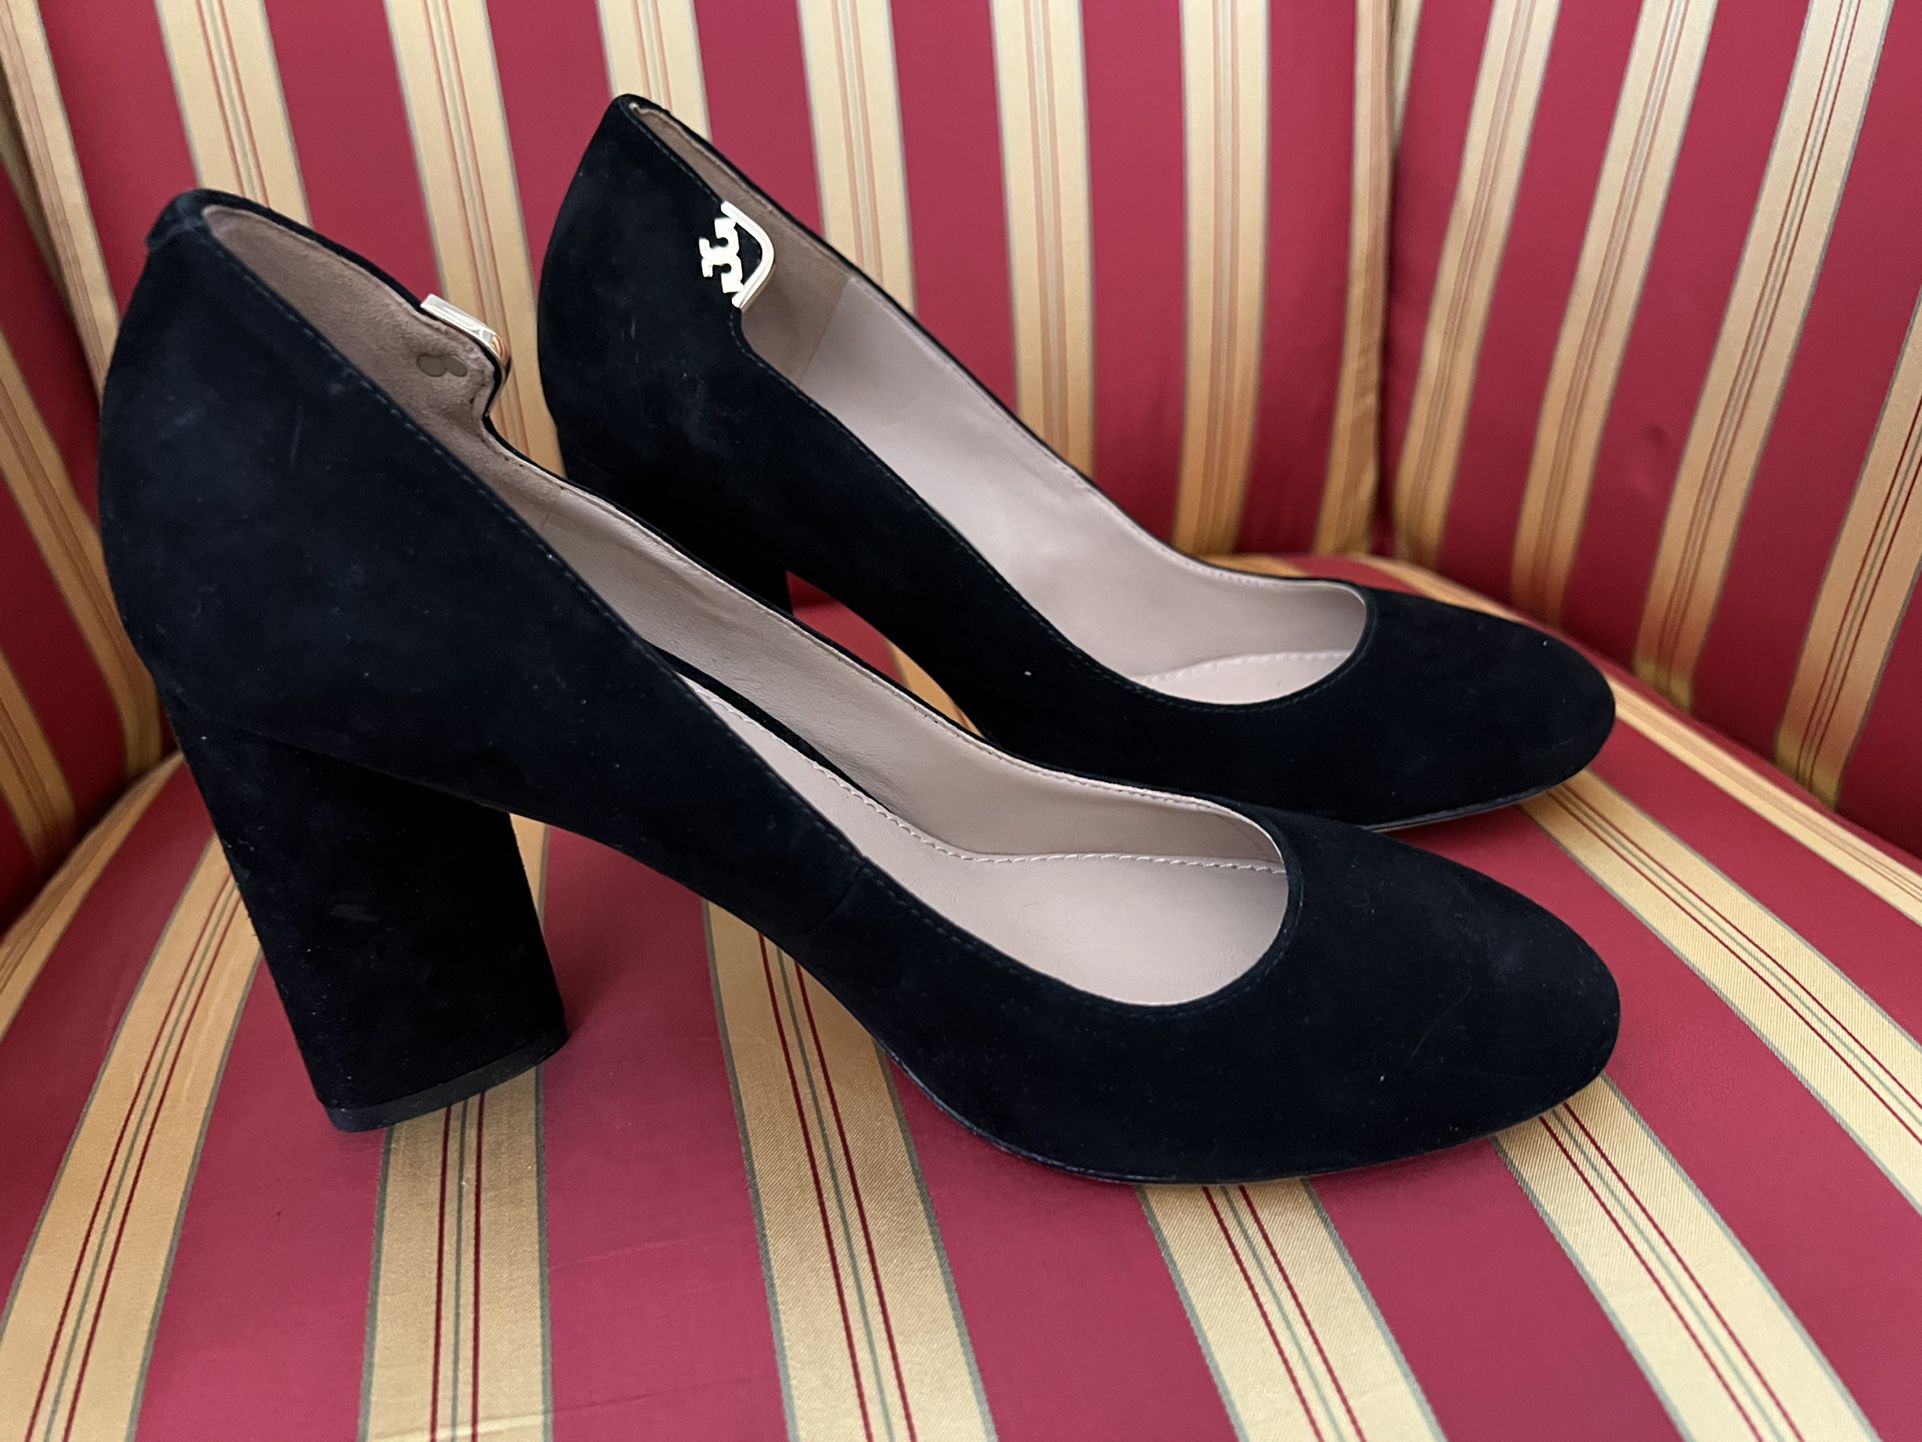 New Tory Burch Suede High Heels Size 7M for Sale in Gretna, NE - OfferUp